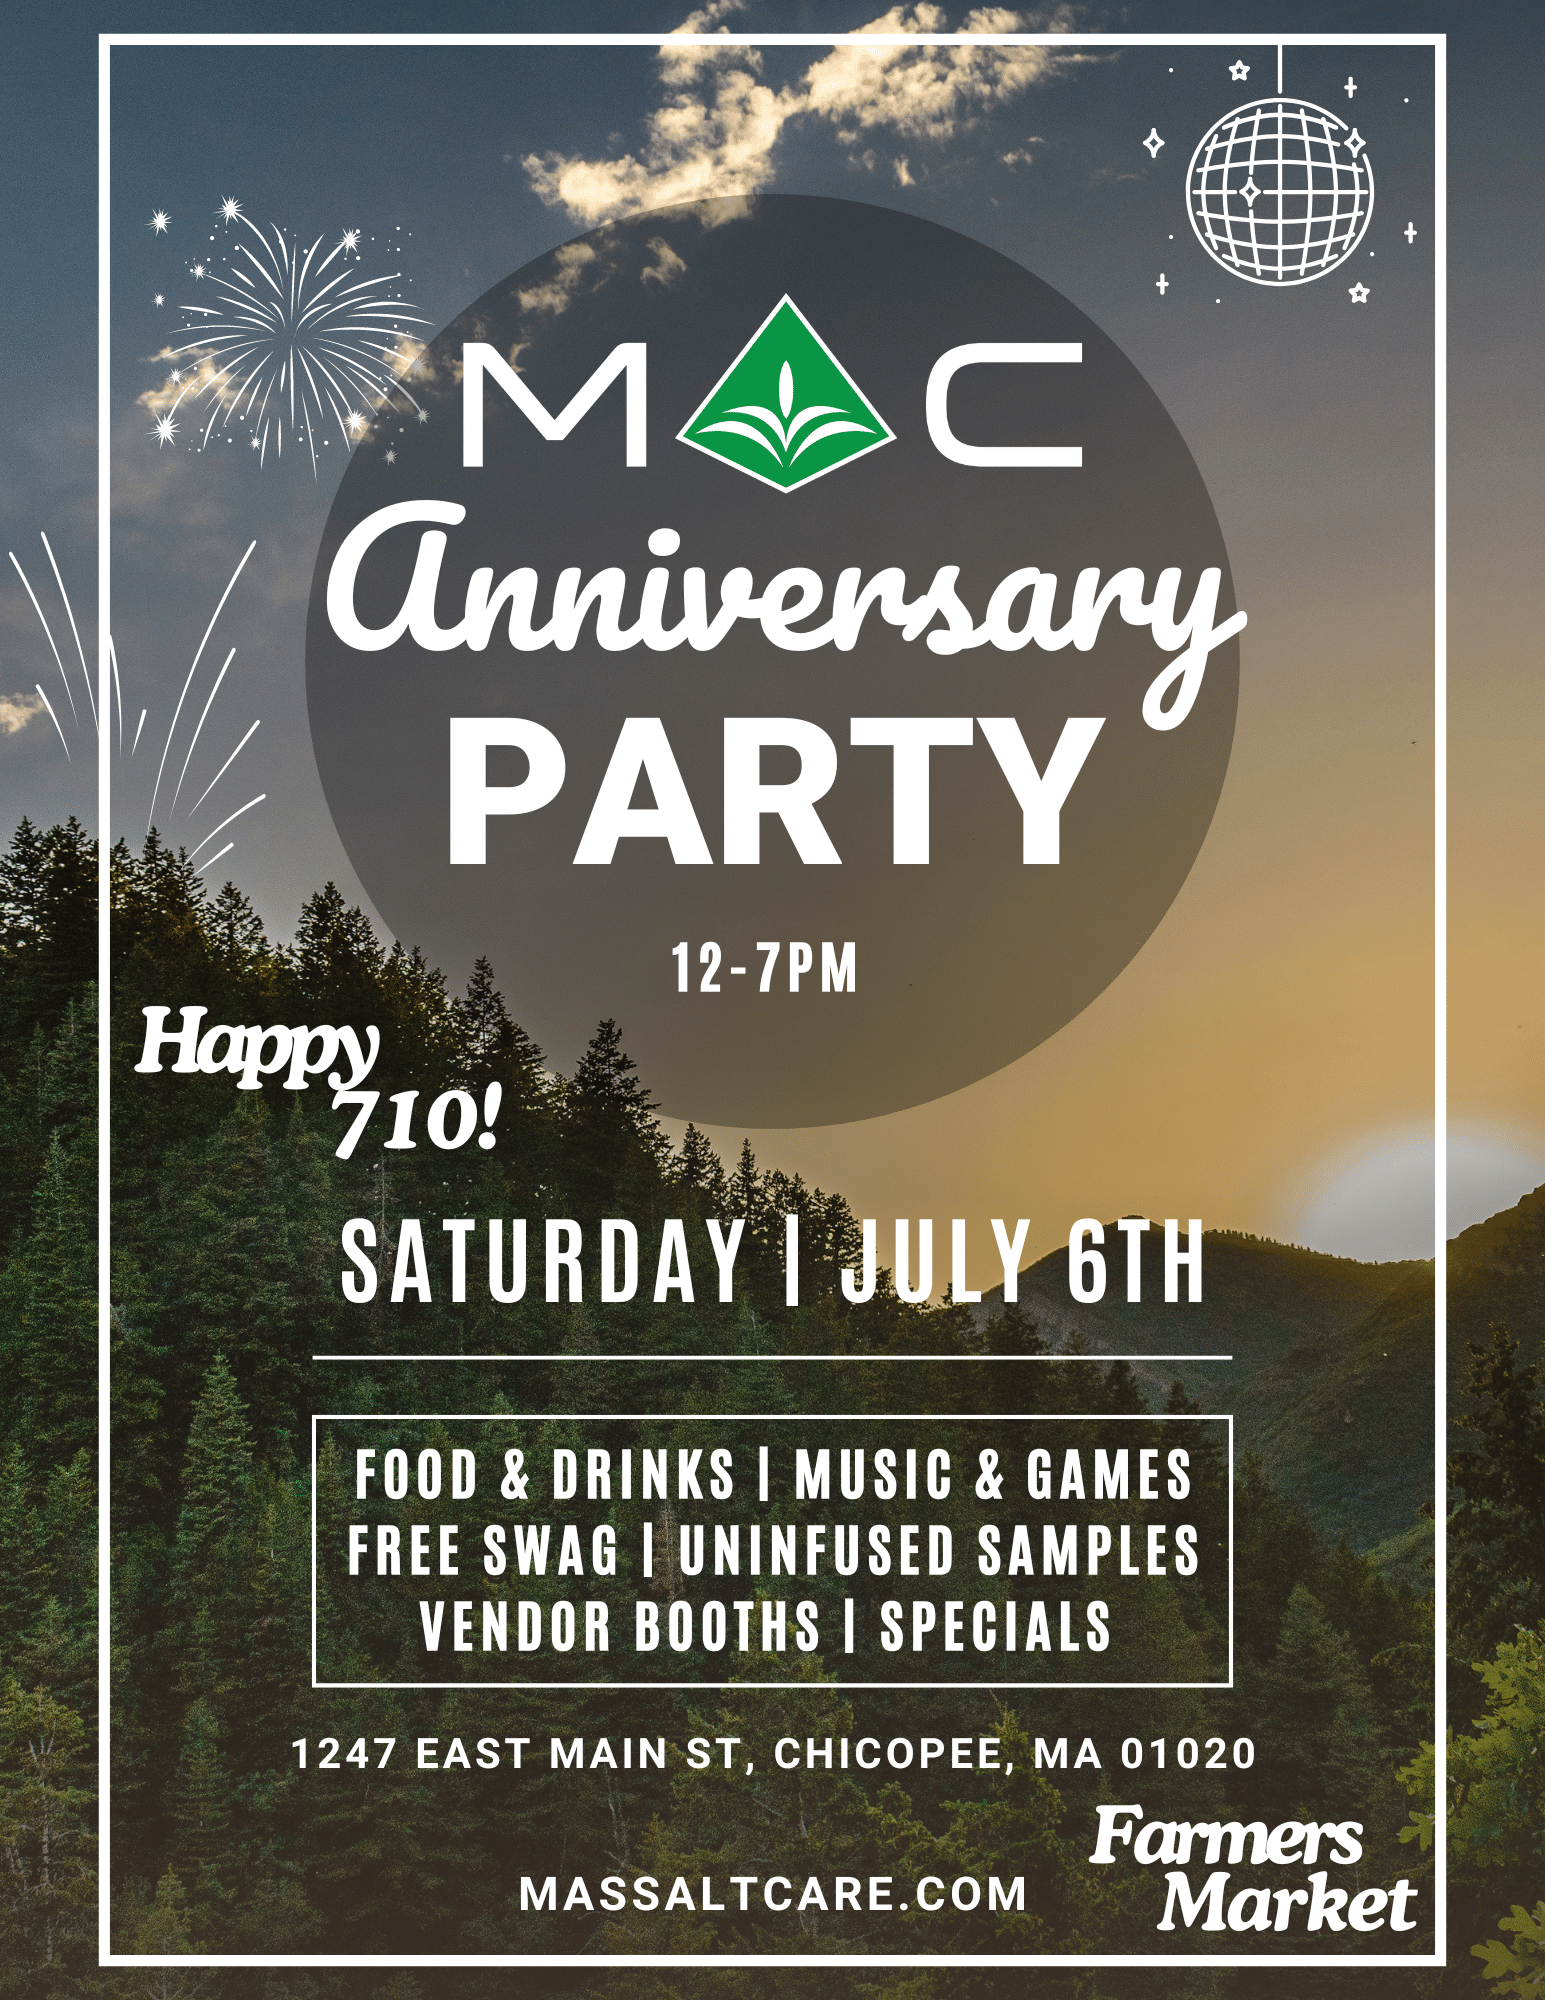 MAC Anniversary Party Flyer